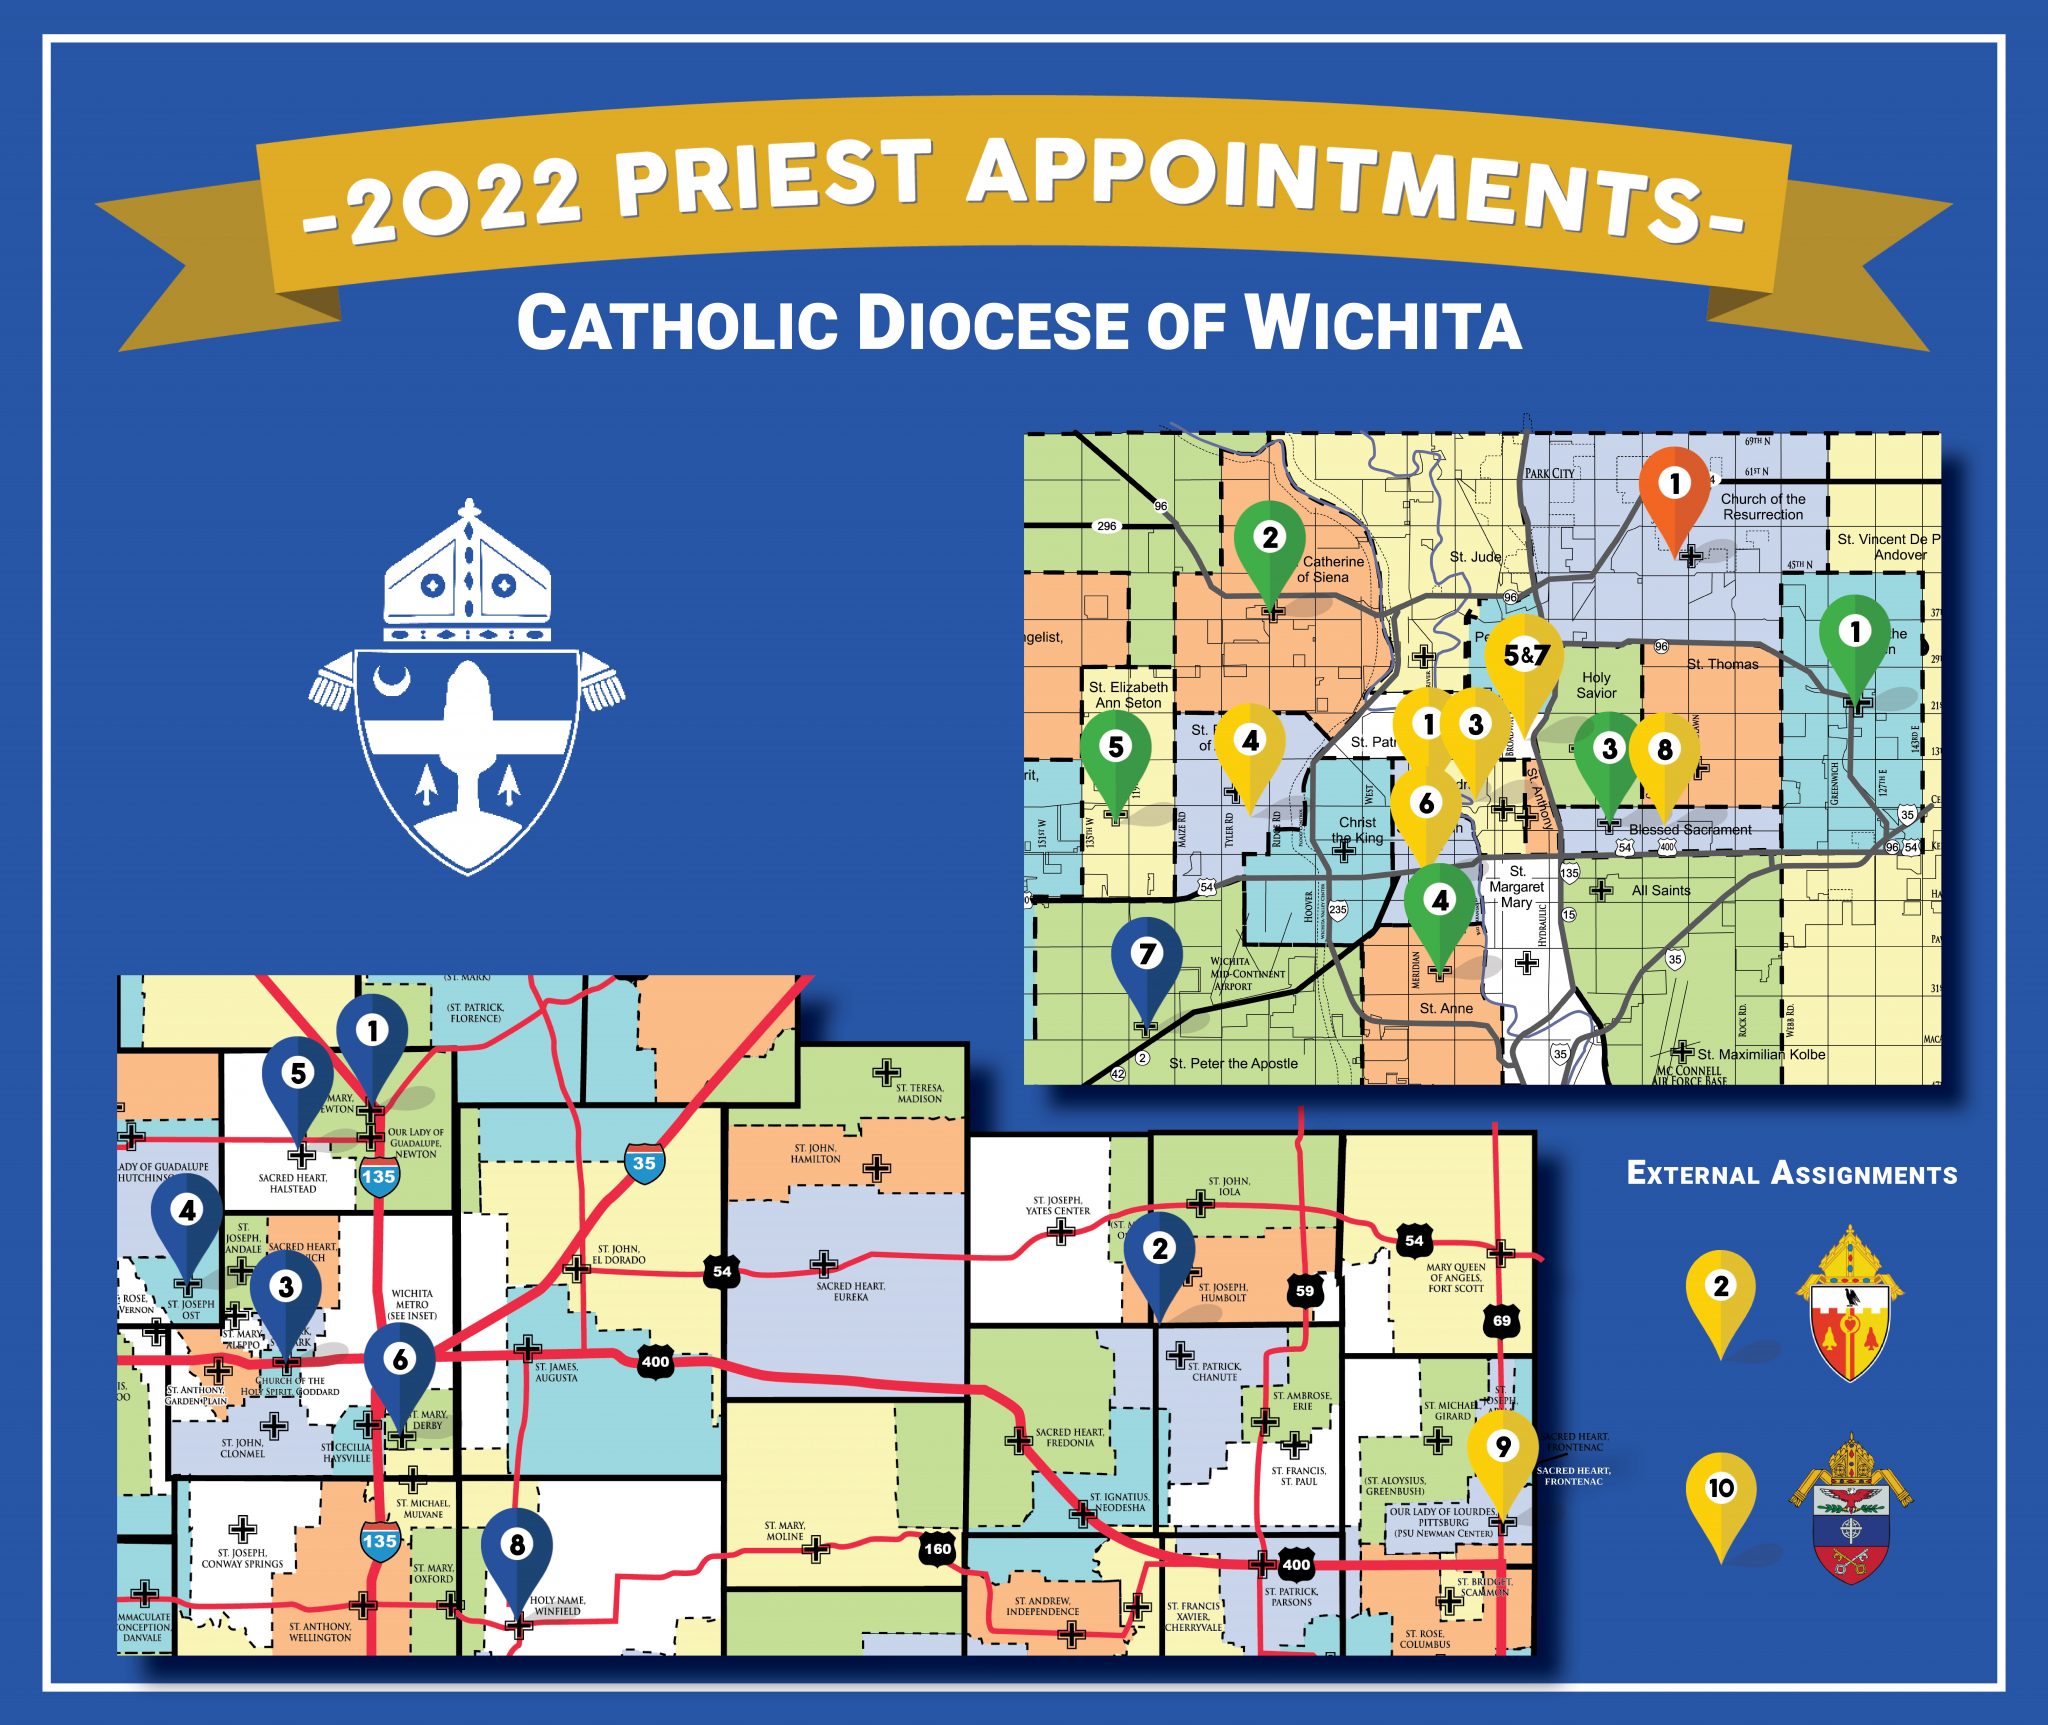 davenport diocese priest assignments 2022